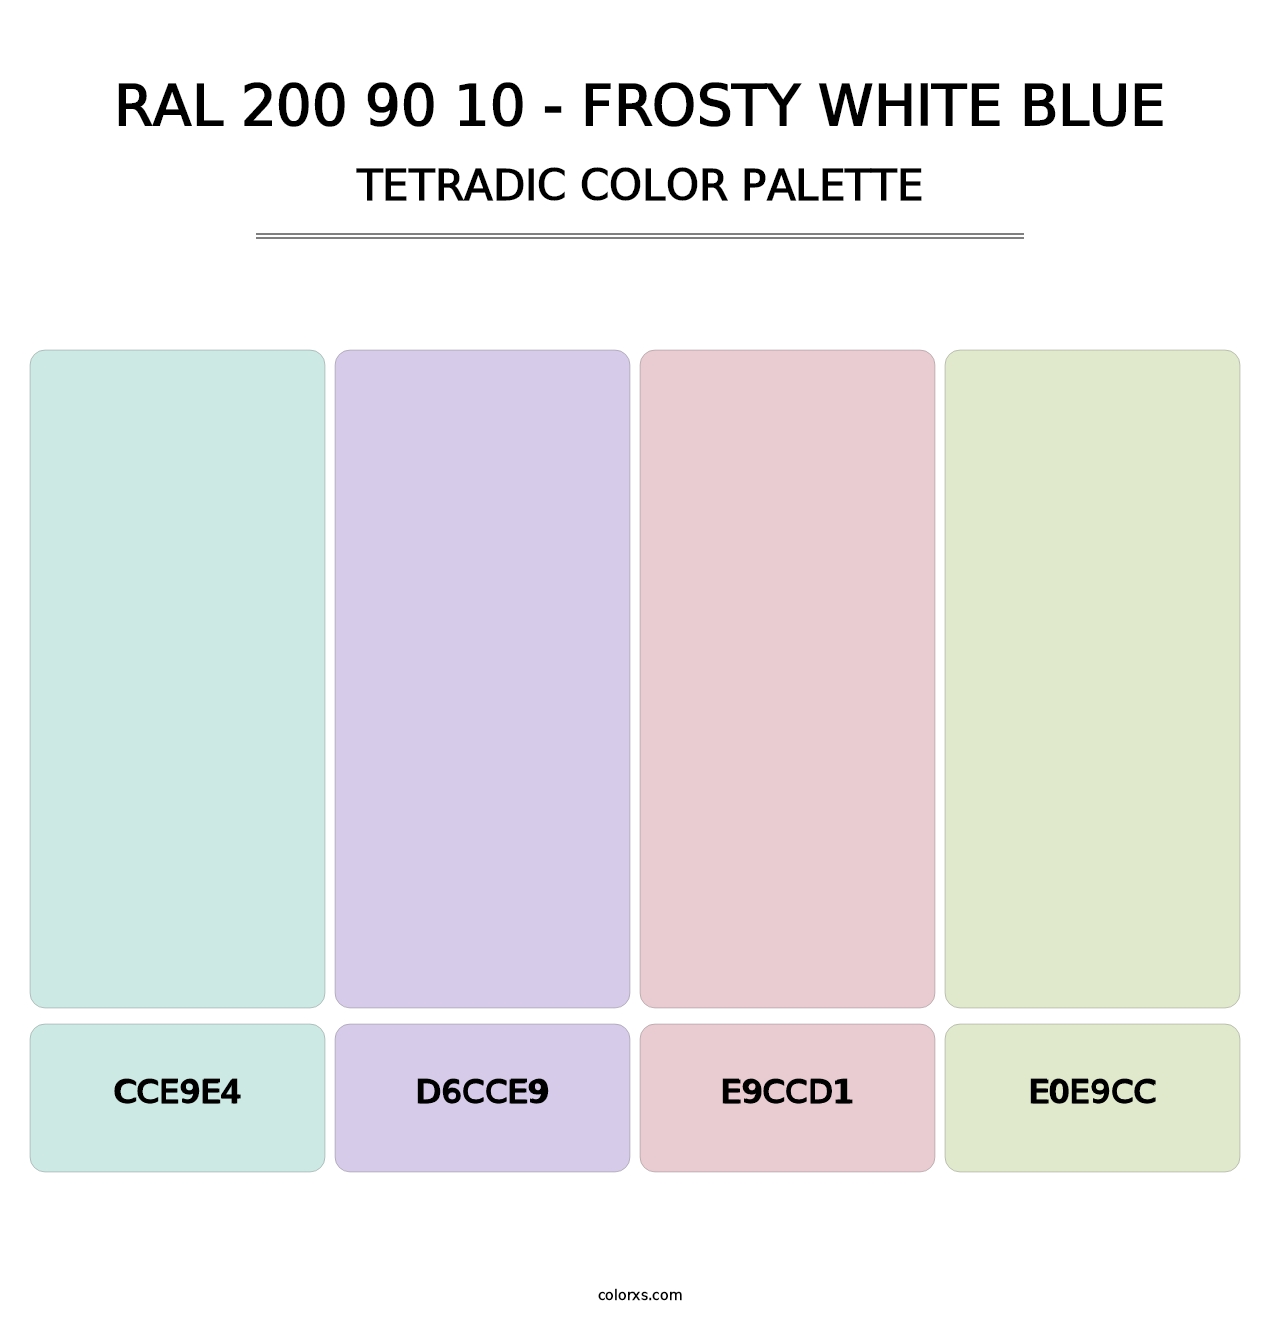 RAL 200 90 10 - Frosty White Blue - Tetradic Color Palette